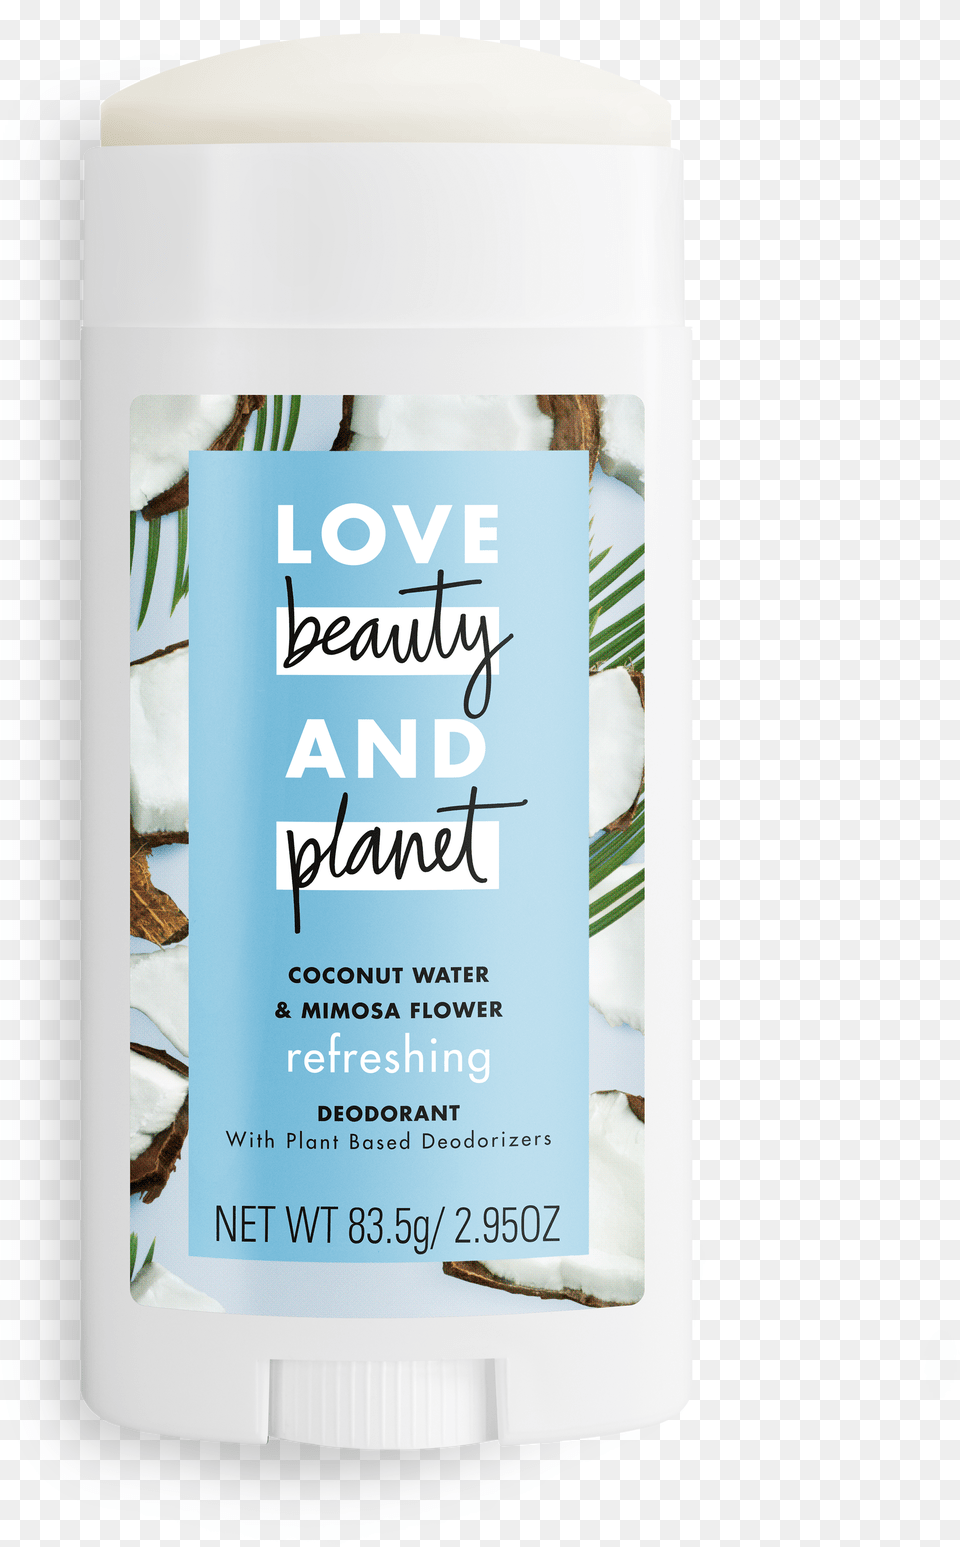 Coconut Water Mimosa Flower Body Love Beauty Planet Deodorant Free Png Download